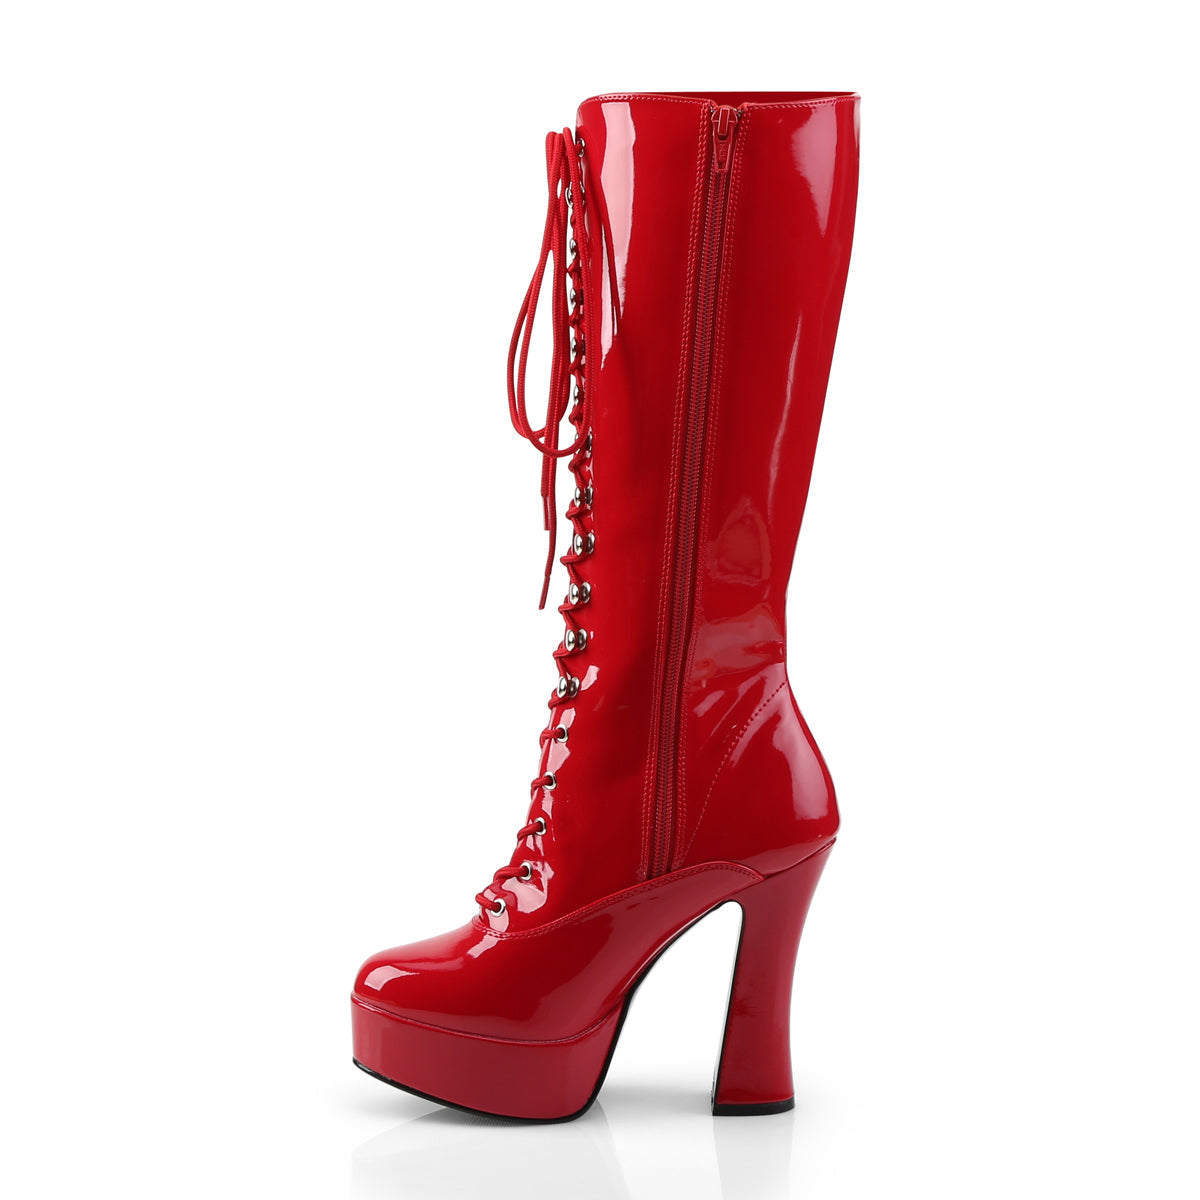 5" Electra Lace Up Knee Boot in red patent, view of inner zipper.